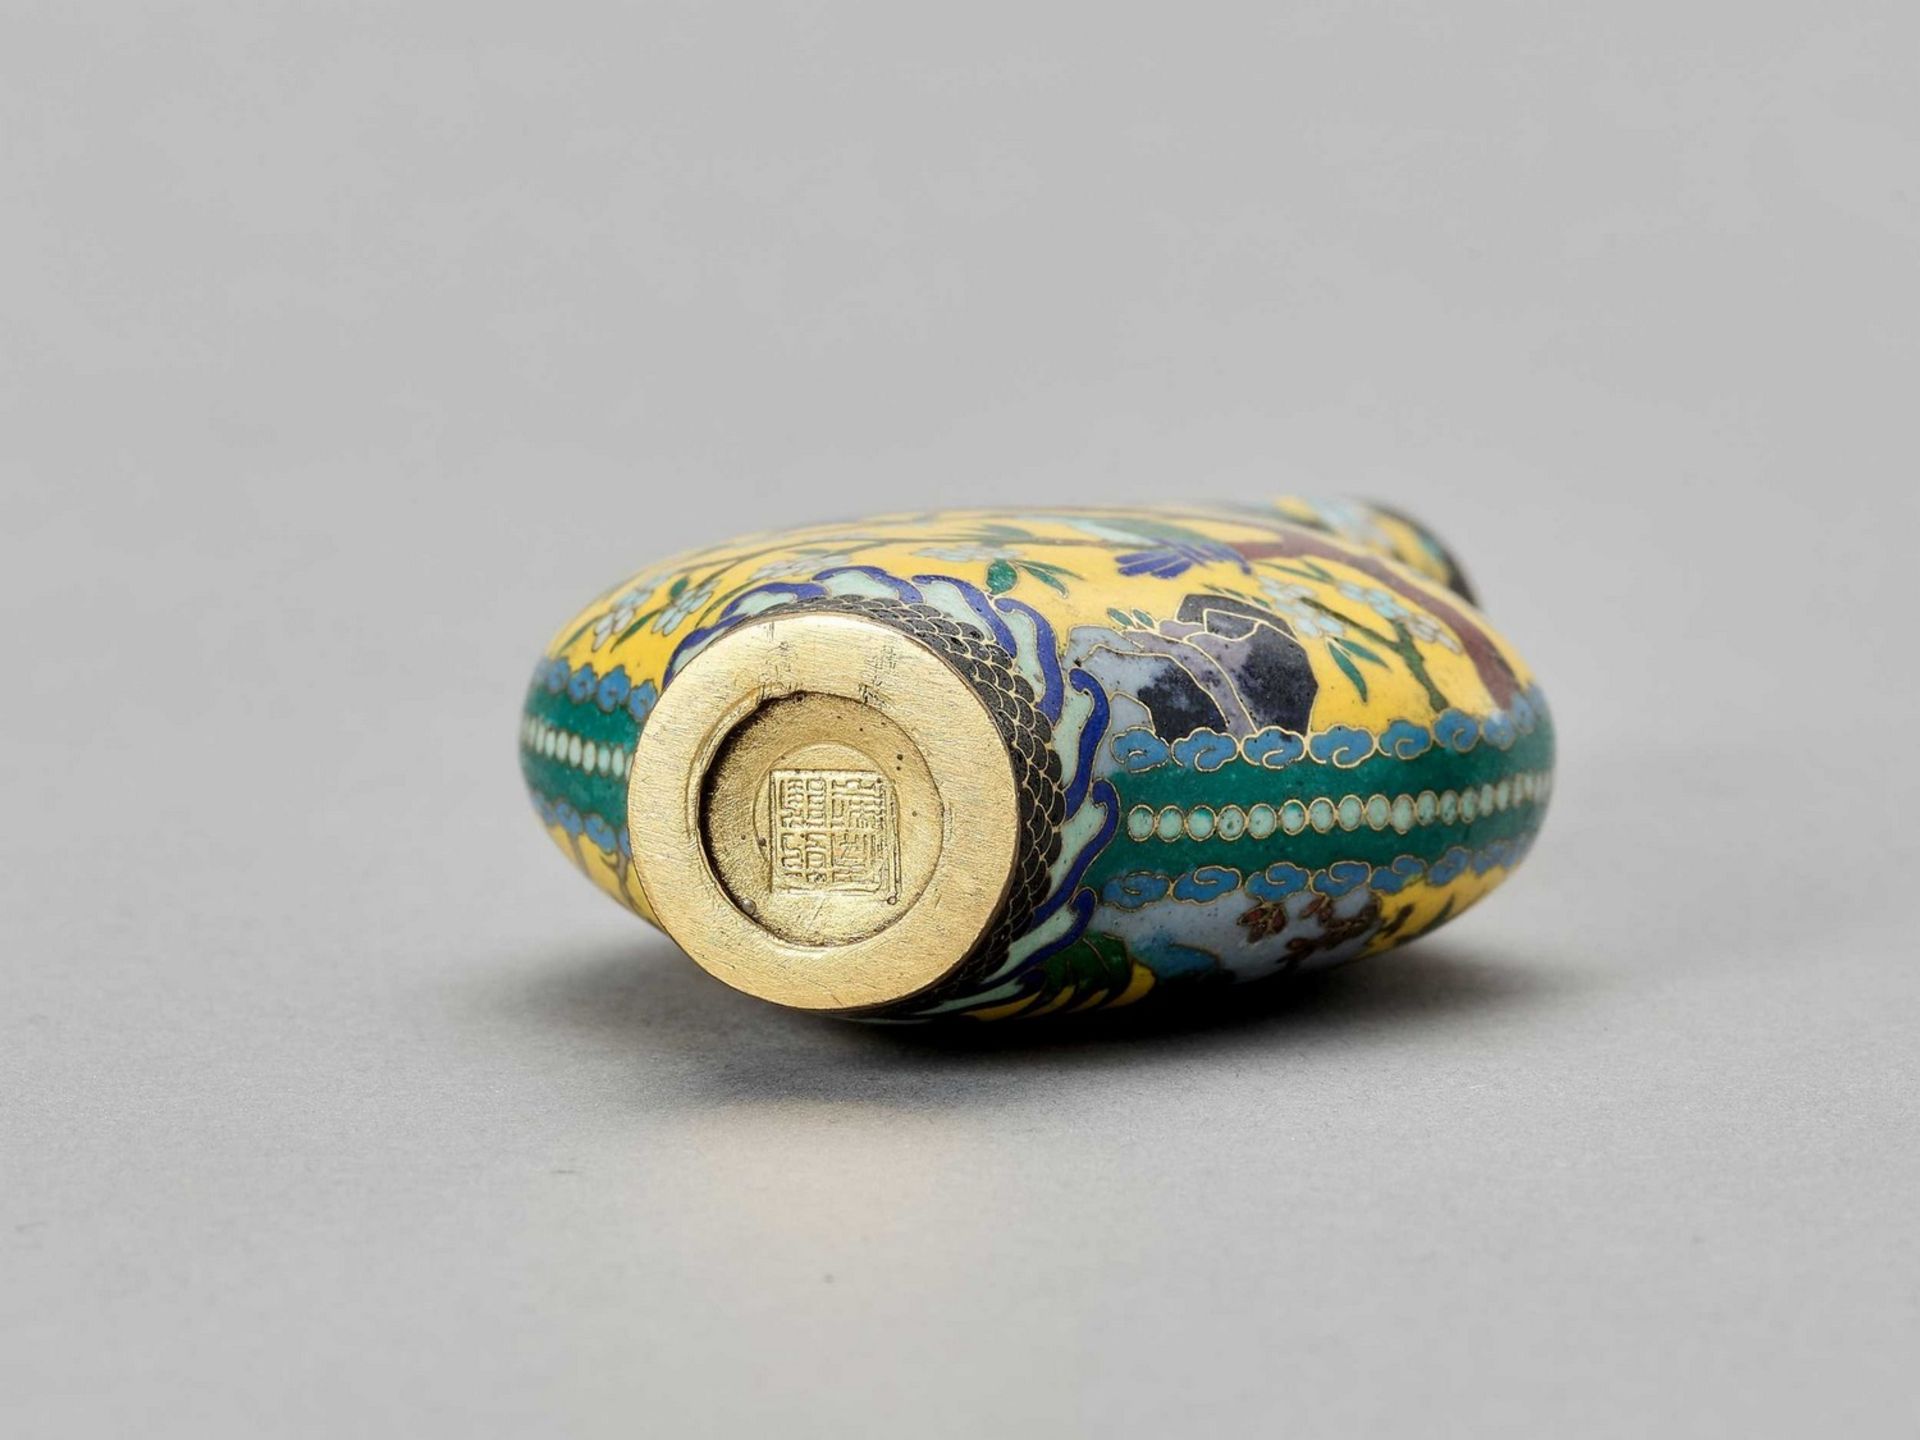 A CLOISONNE SNUFF BOTTLE WITH BIRDS - Image 5 of 7